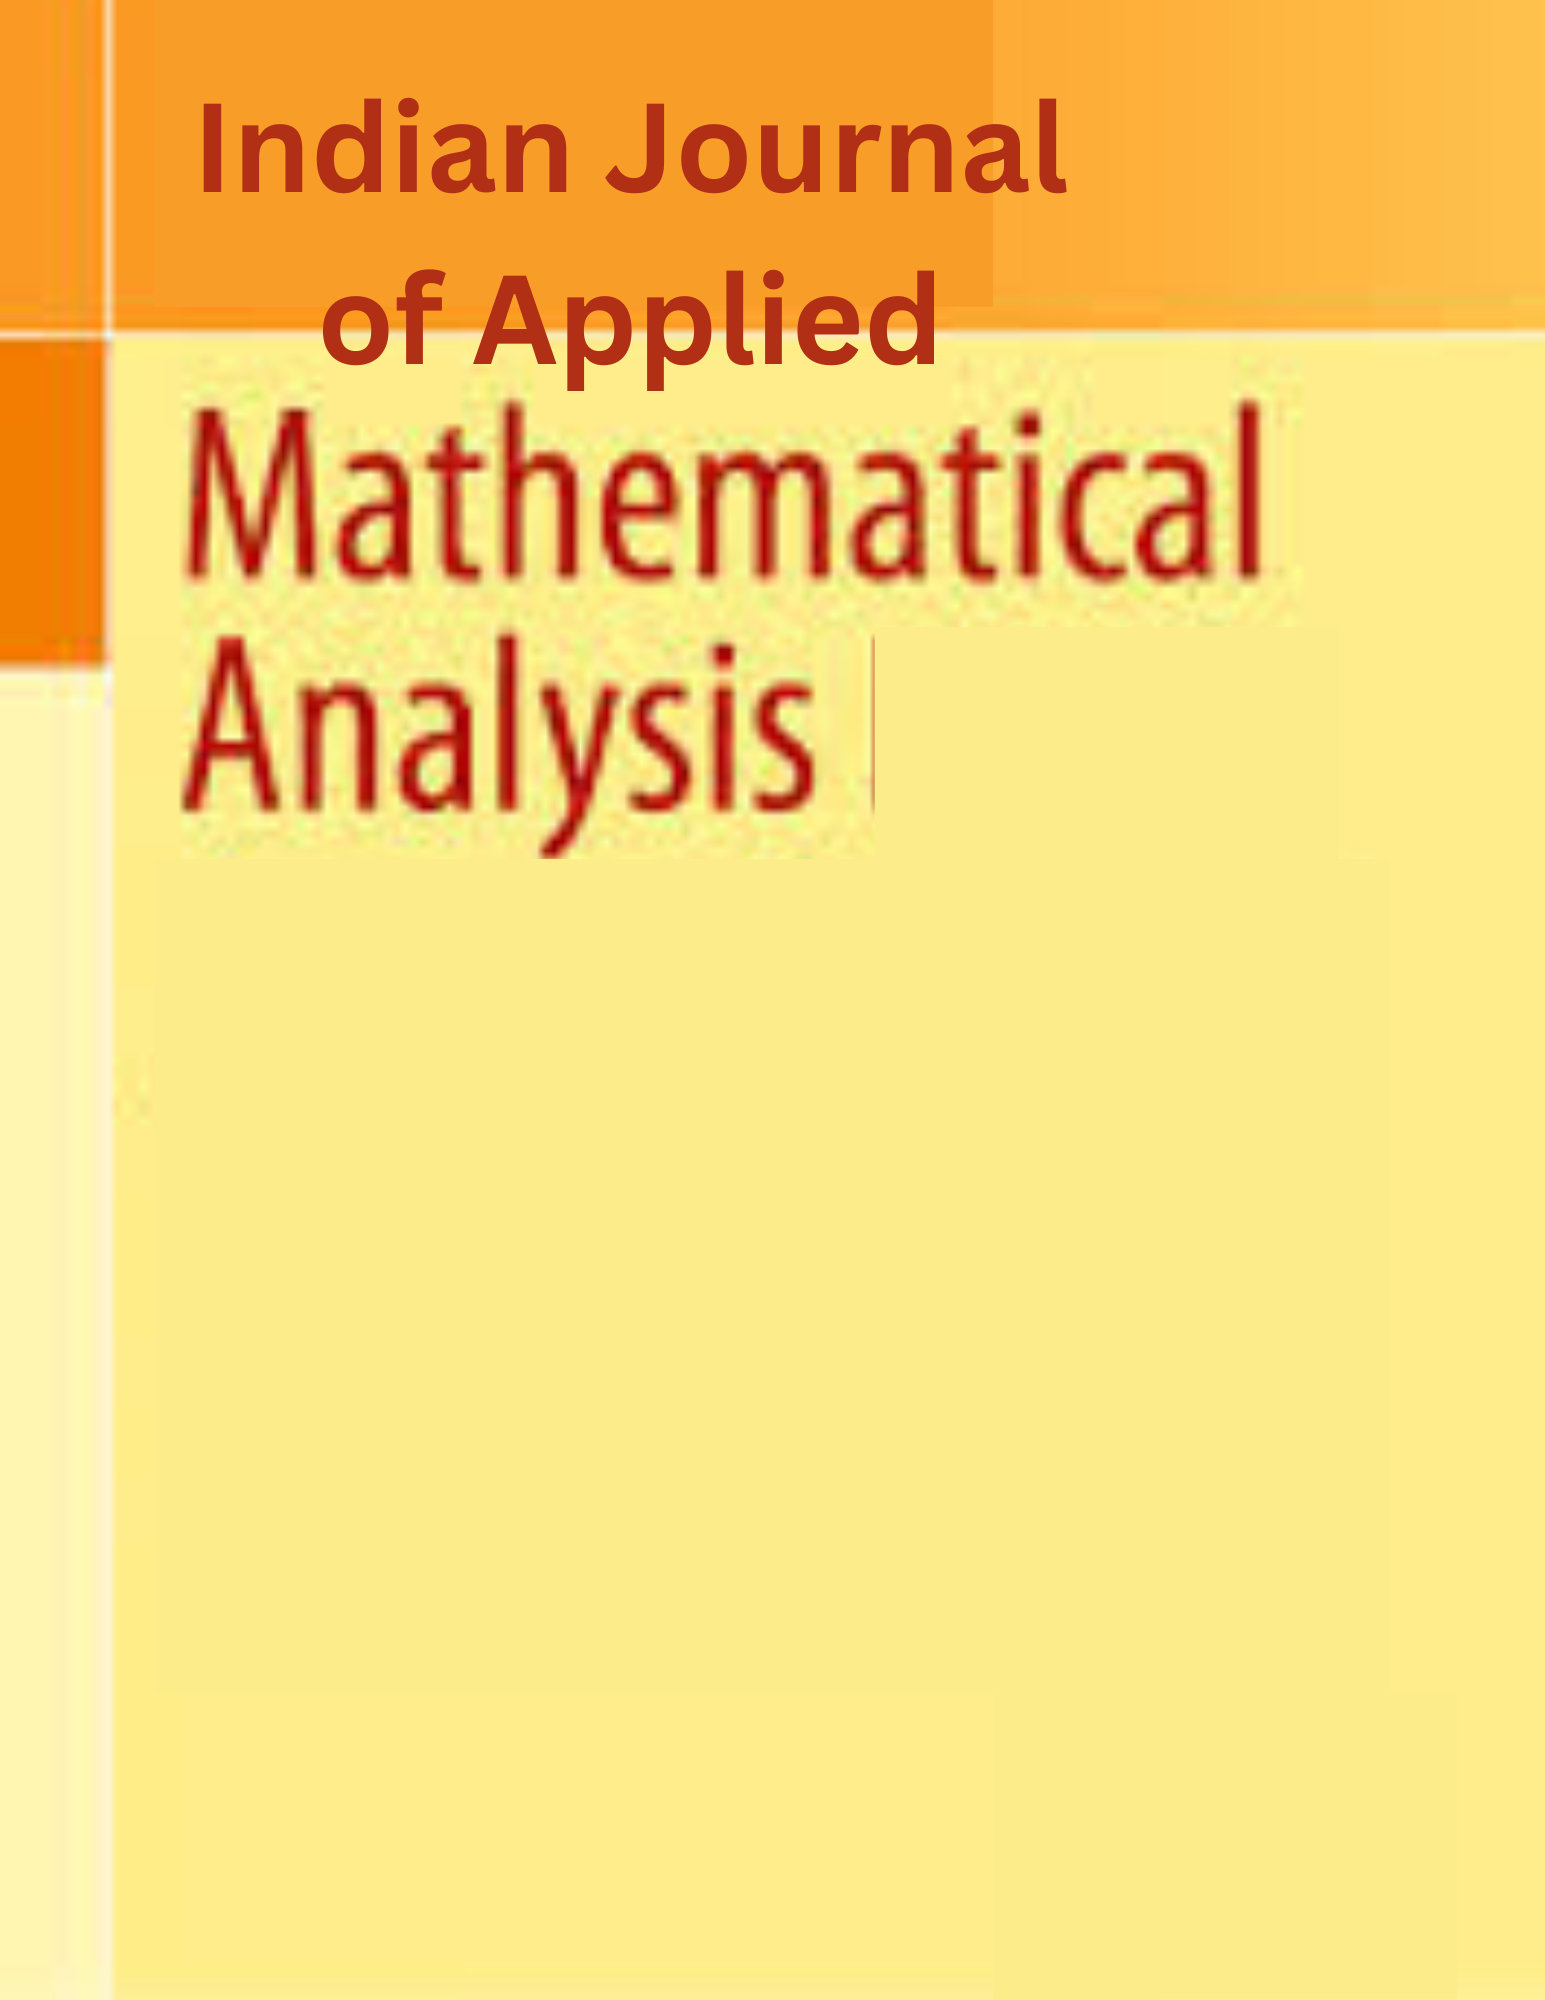 Indian Journal of Applied Mathematical Analysis